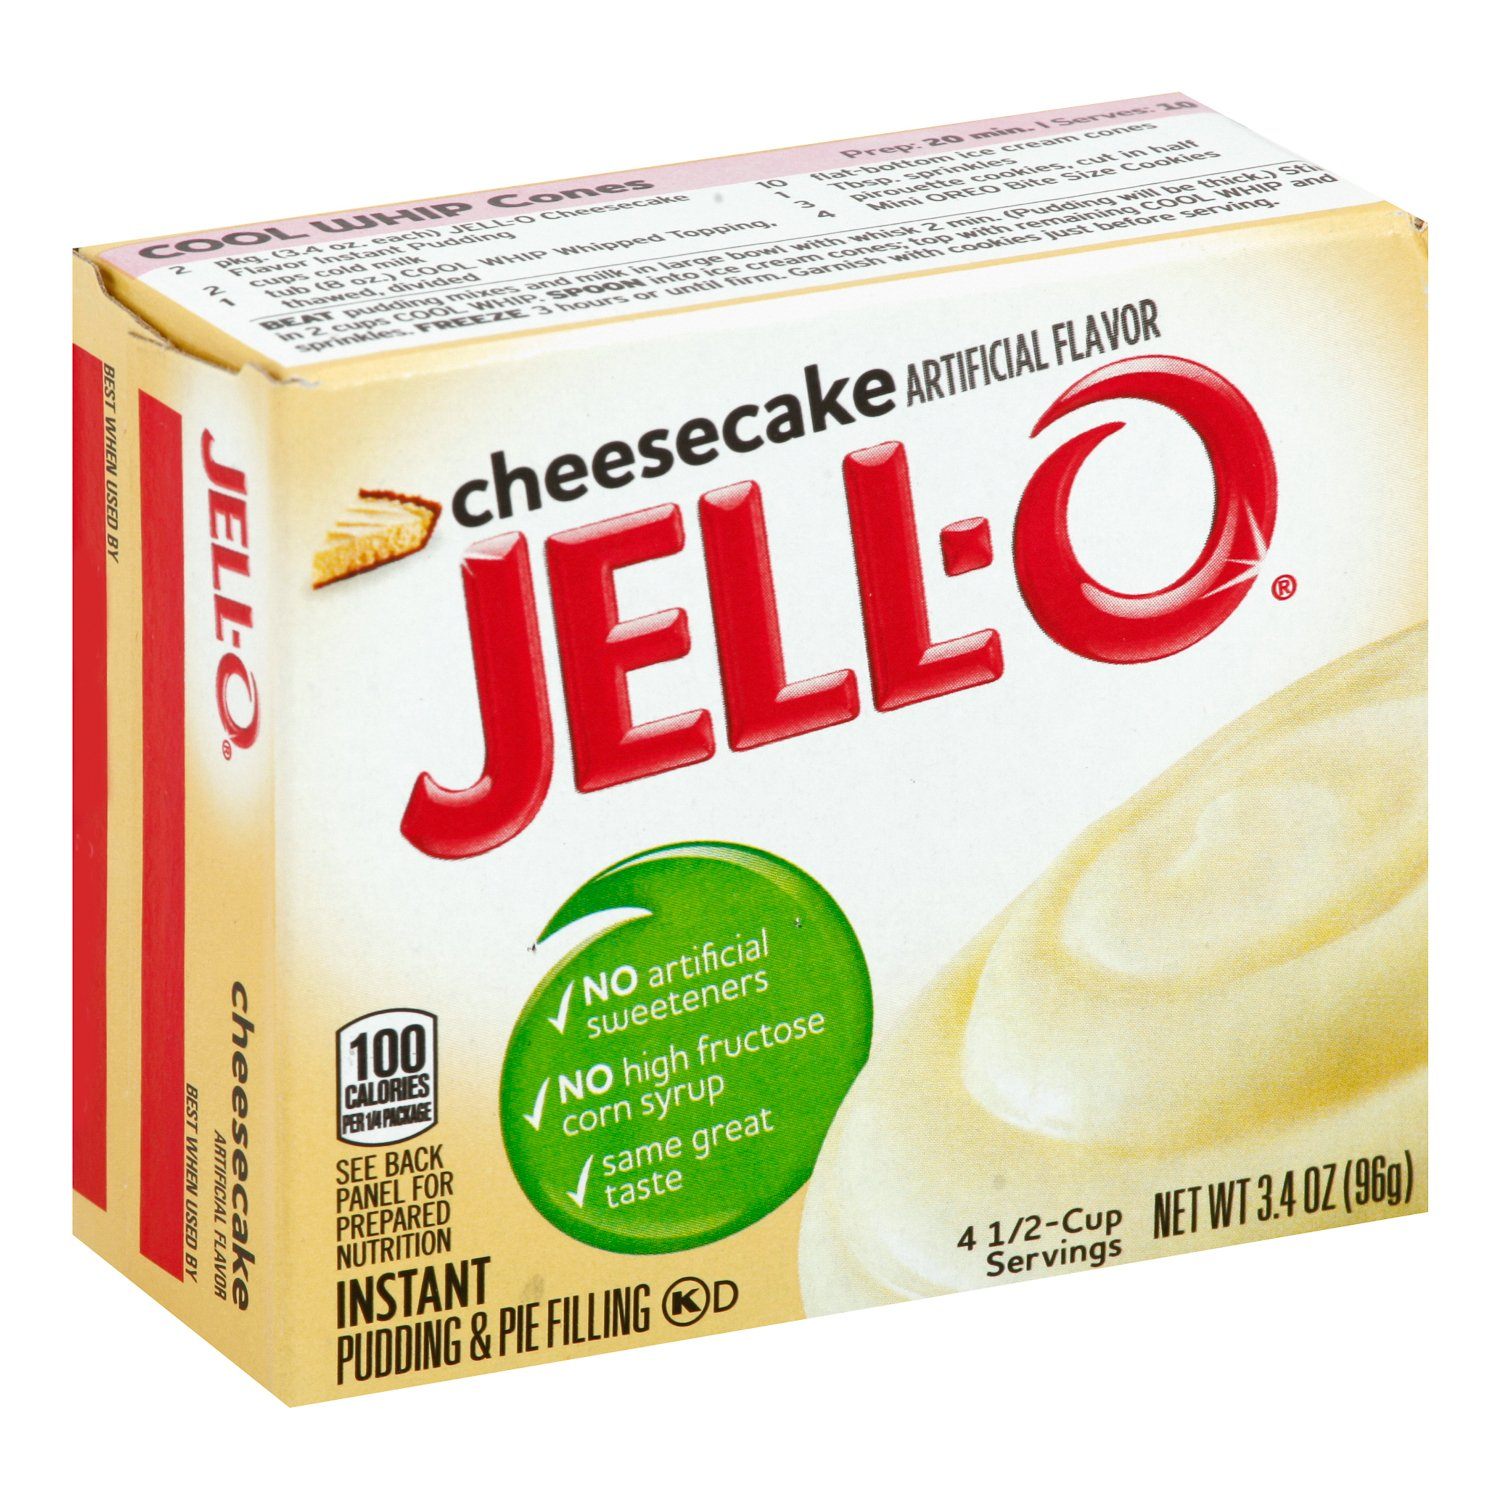 Jell-O Instant Pudding & Pie Filling Mixes Jell-O Cheesecake 3.4 Ounce 